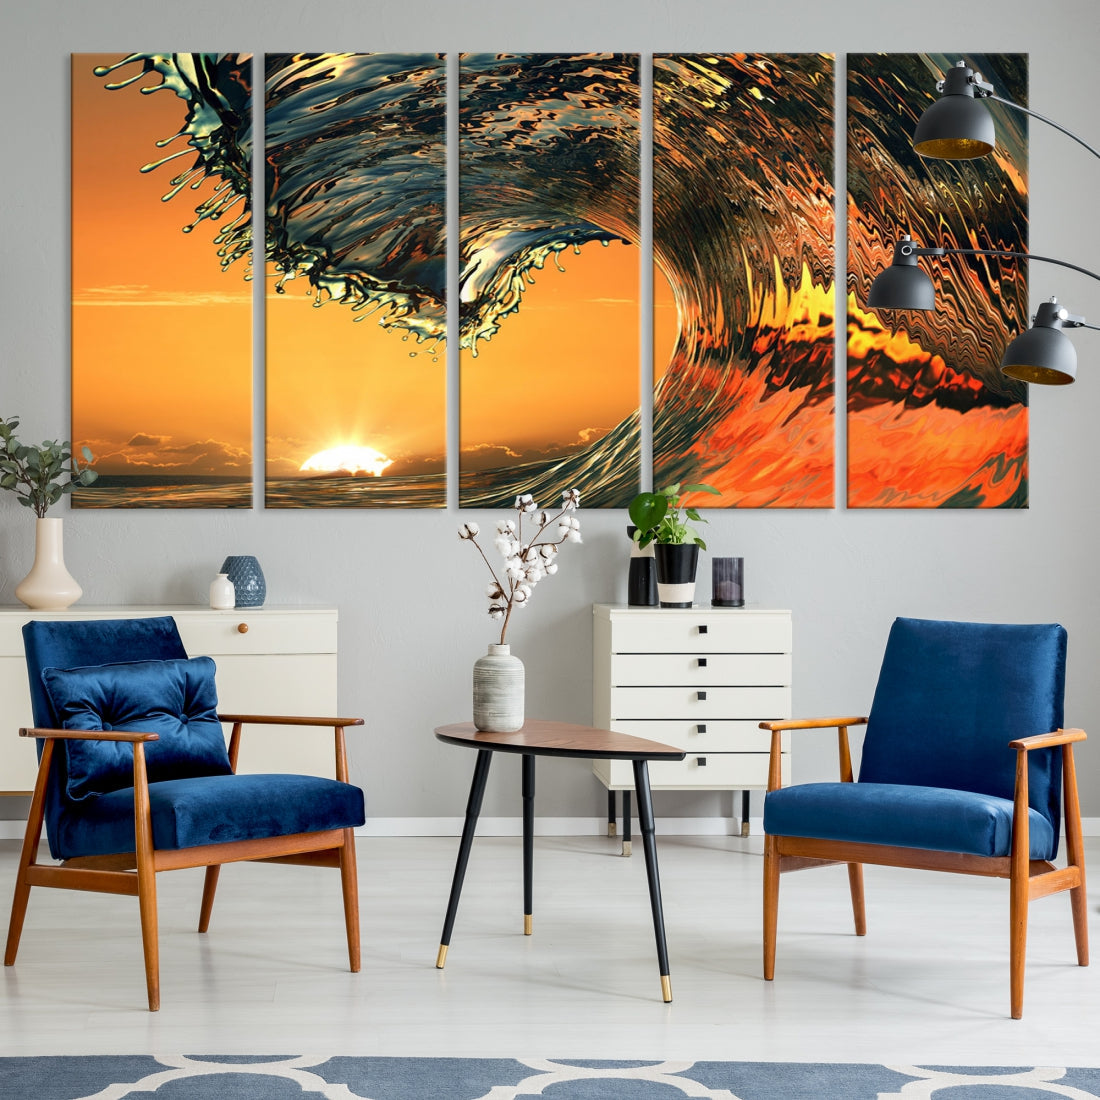 Sunset and Rip Curl Surf Wave Large Canvas Wall Art Giclee Print